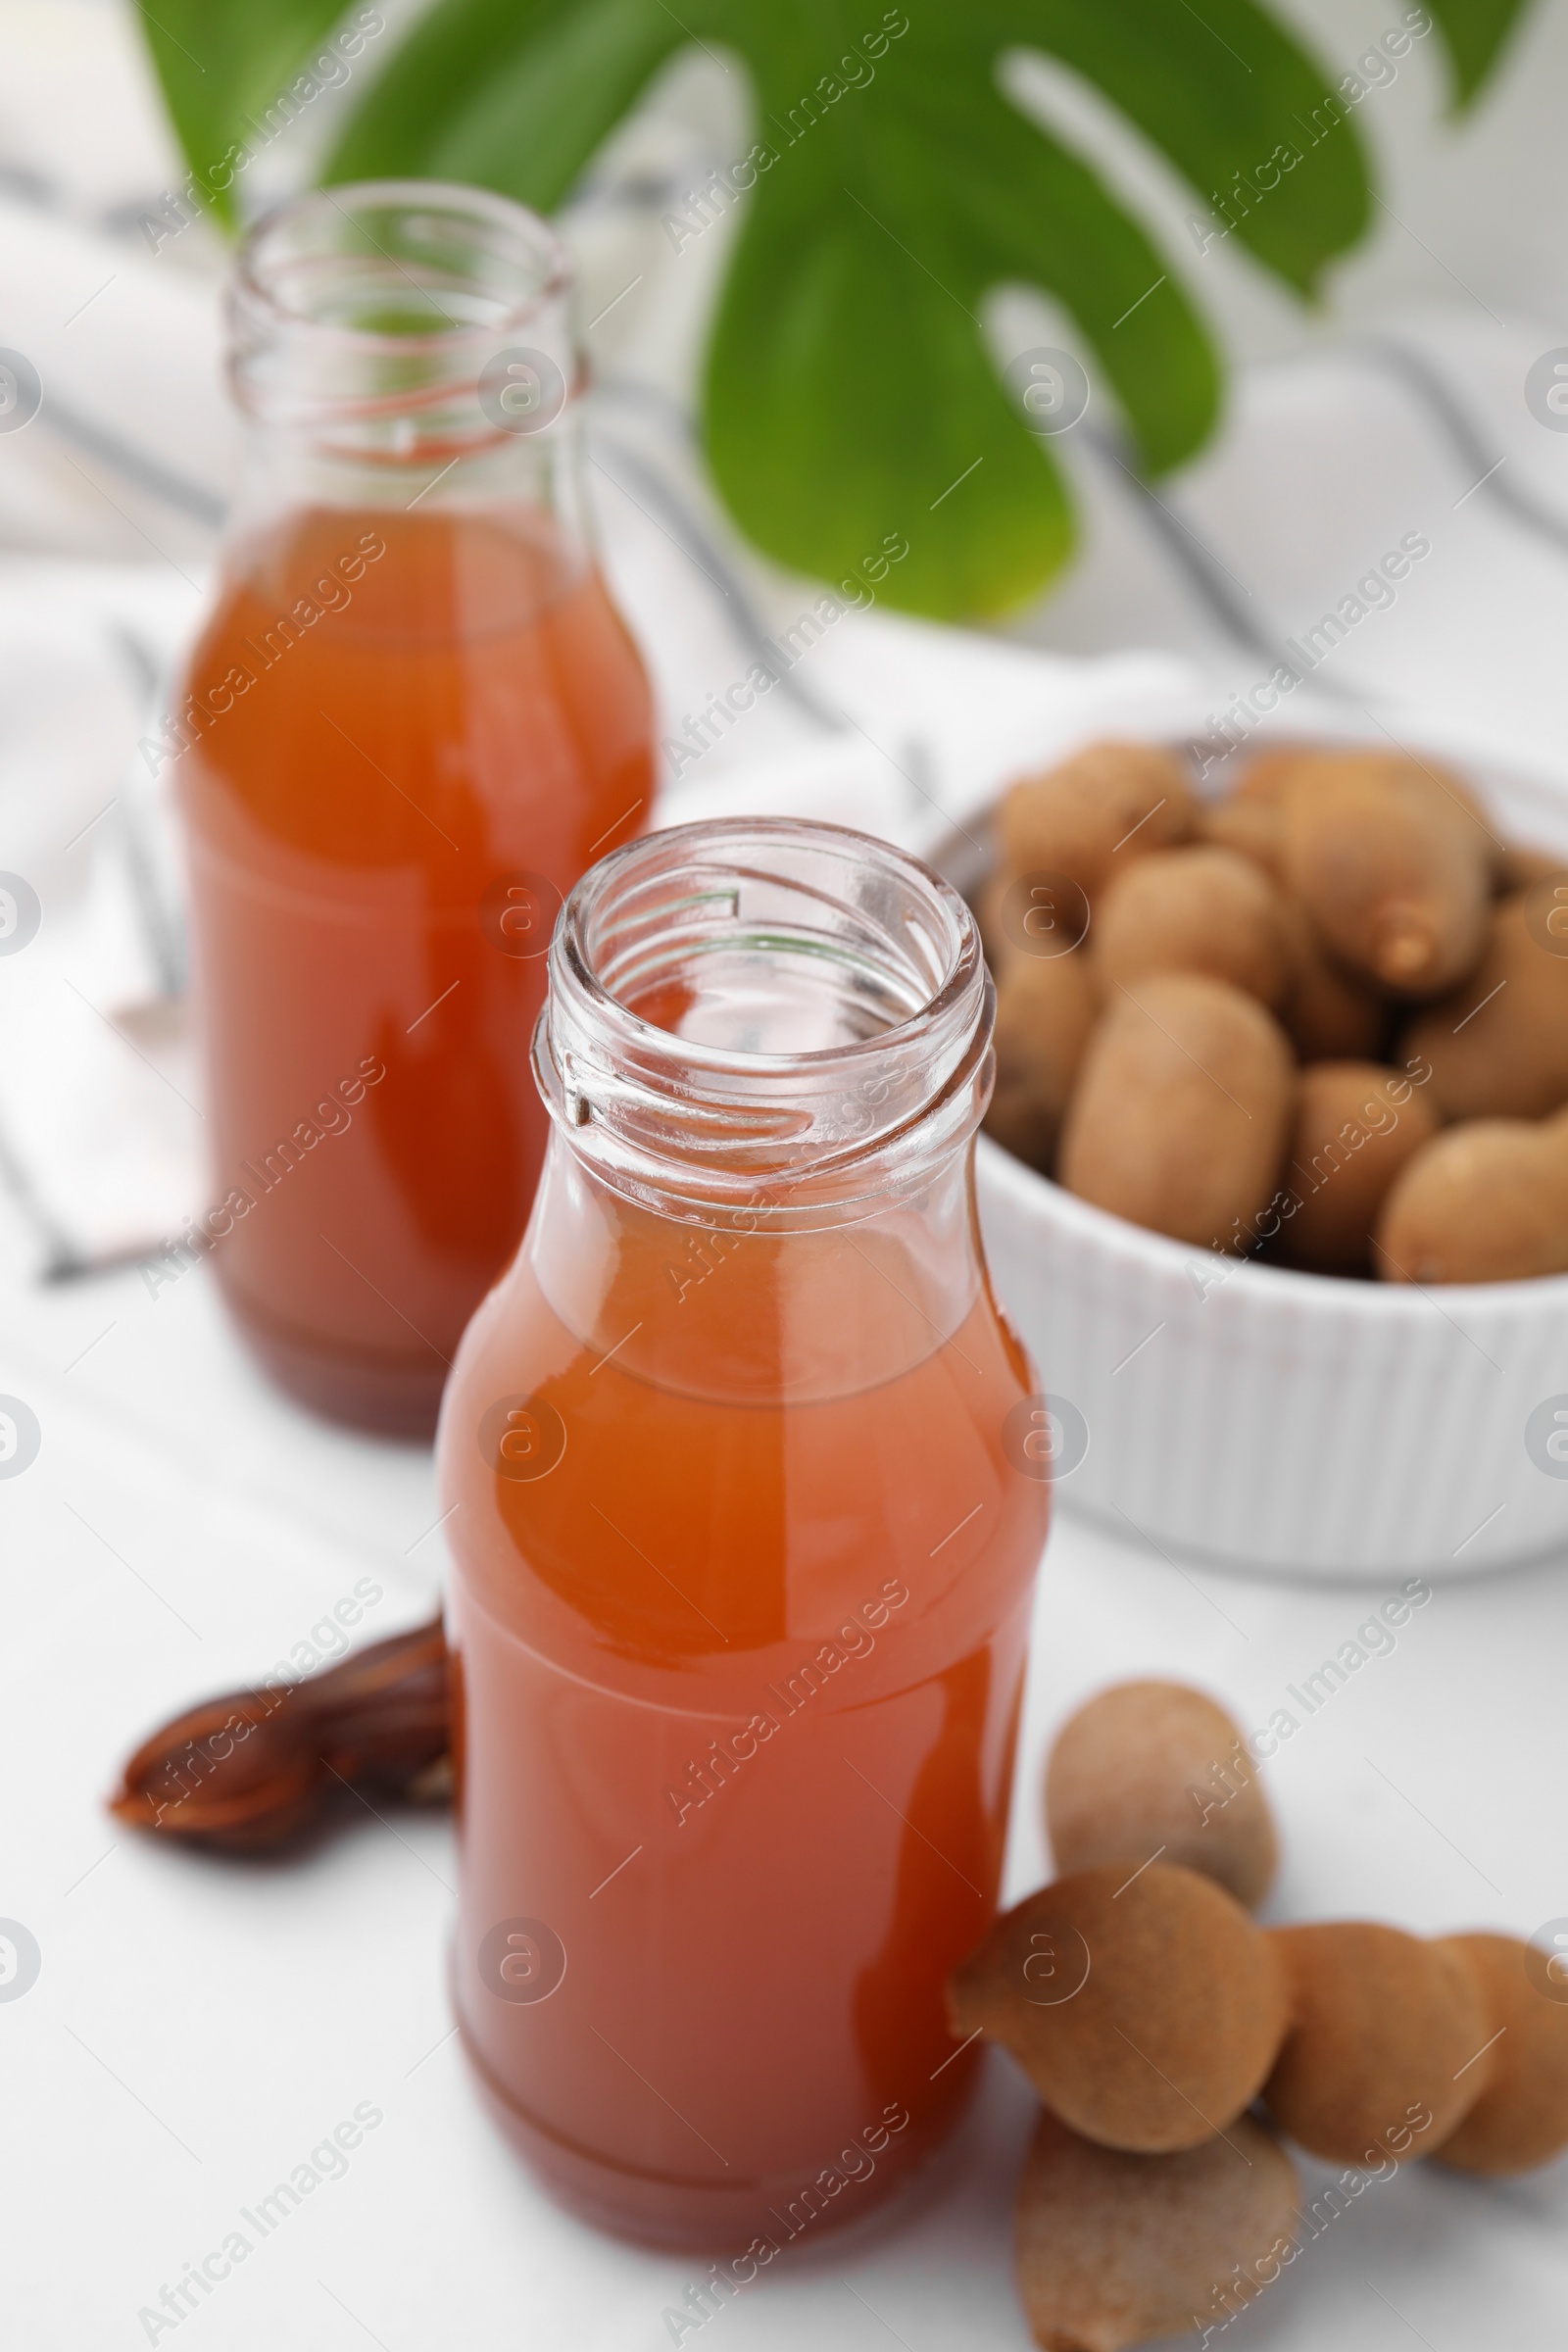 Photo of Tamarind juice and fresh fruits on white table, closeup